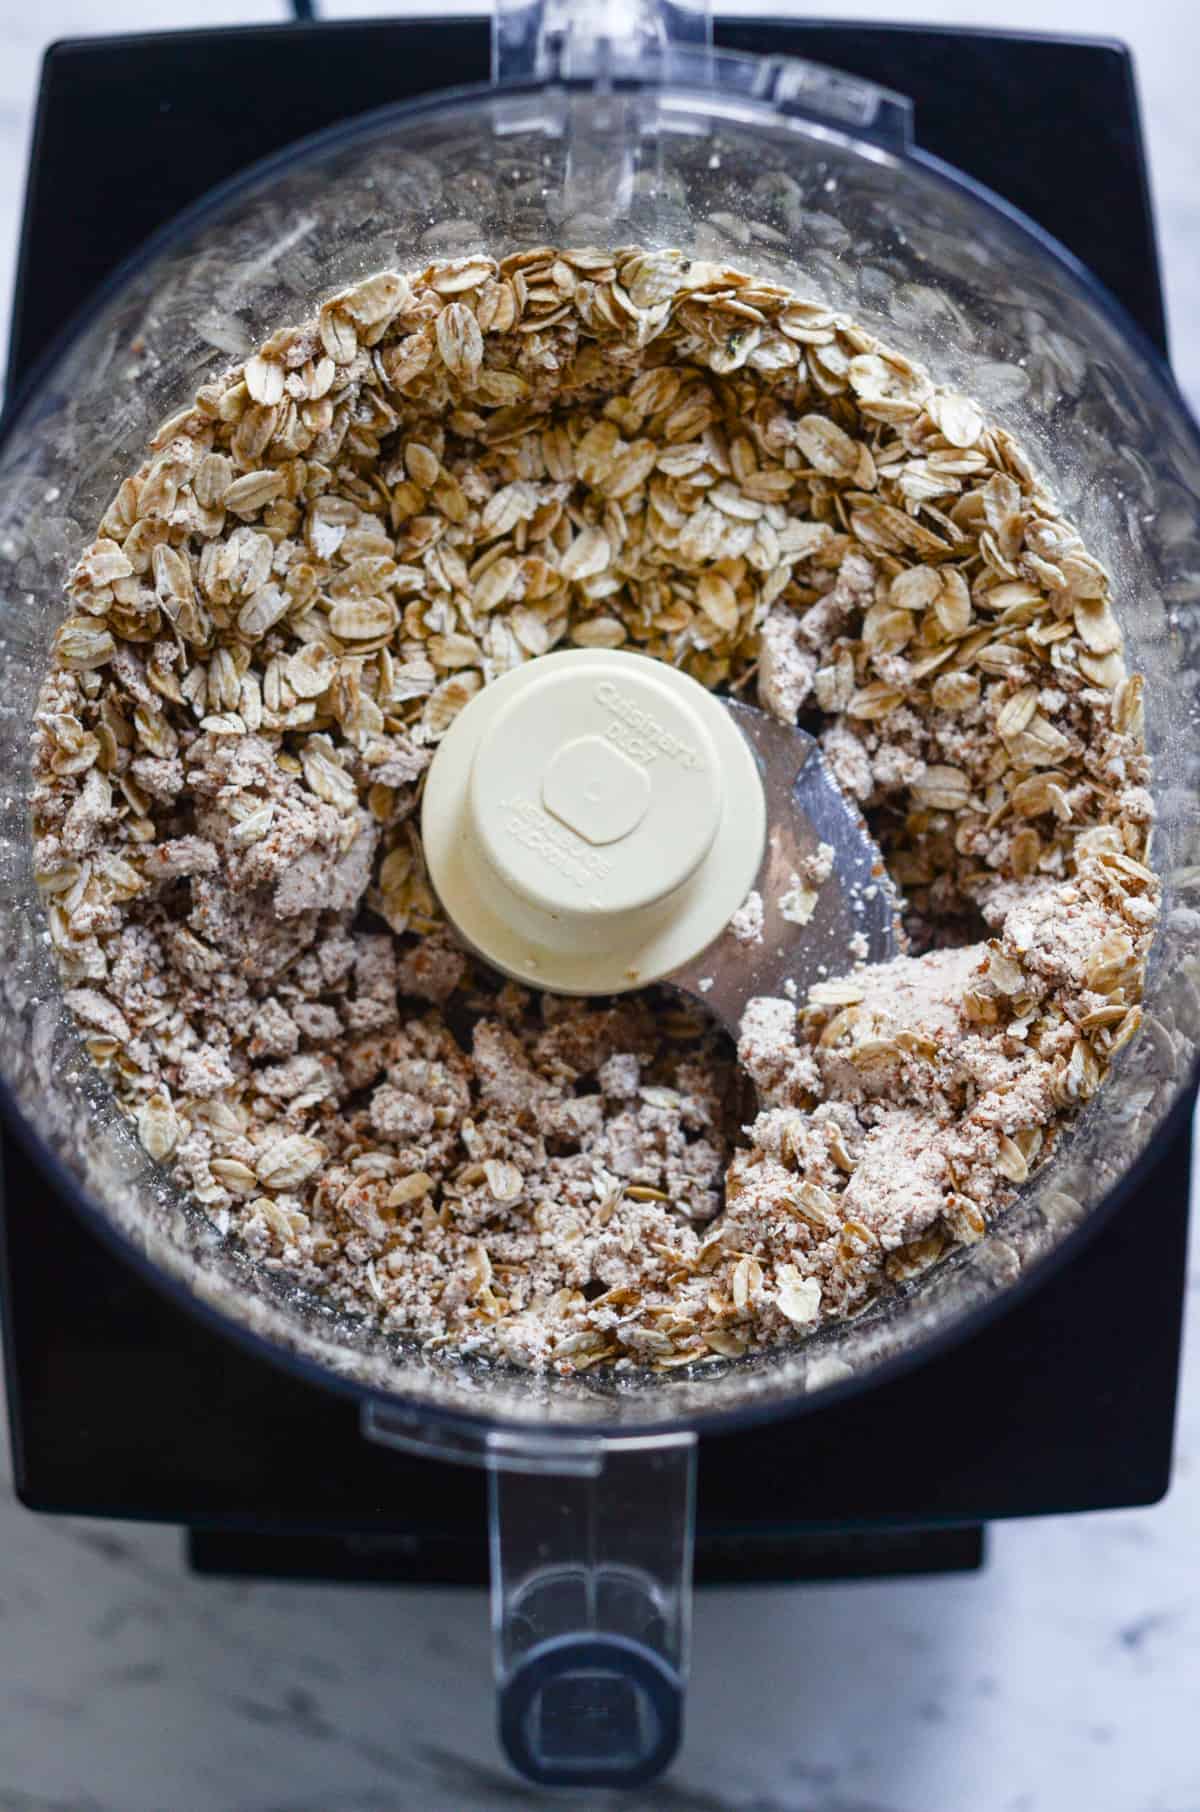 Rolled oats and almond pulp being mixed together.